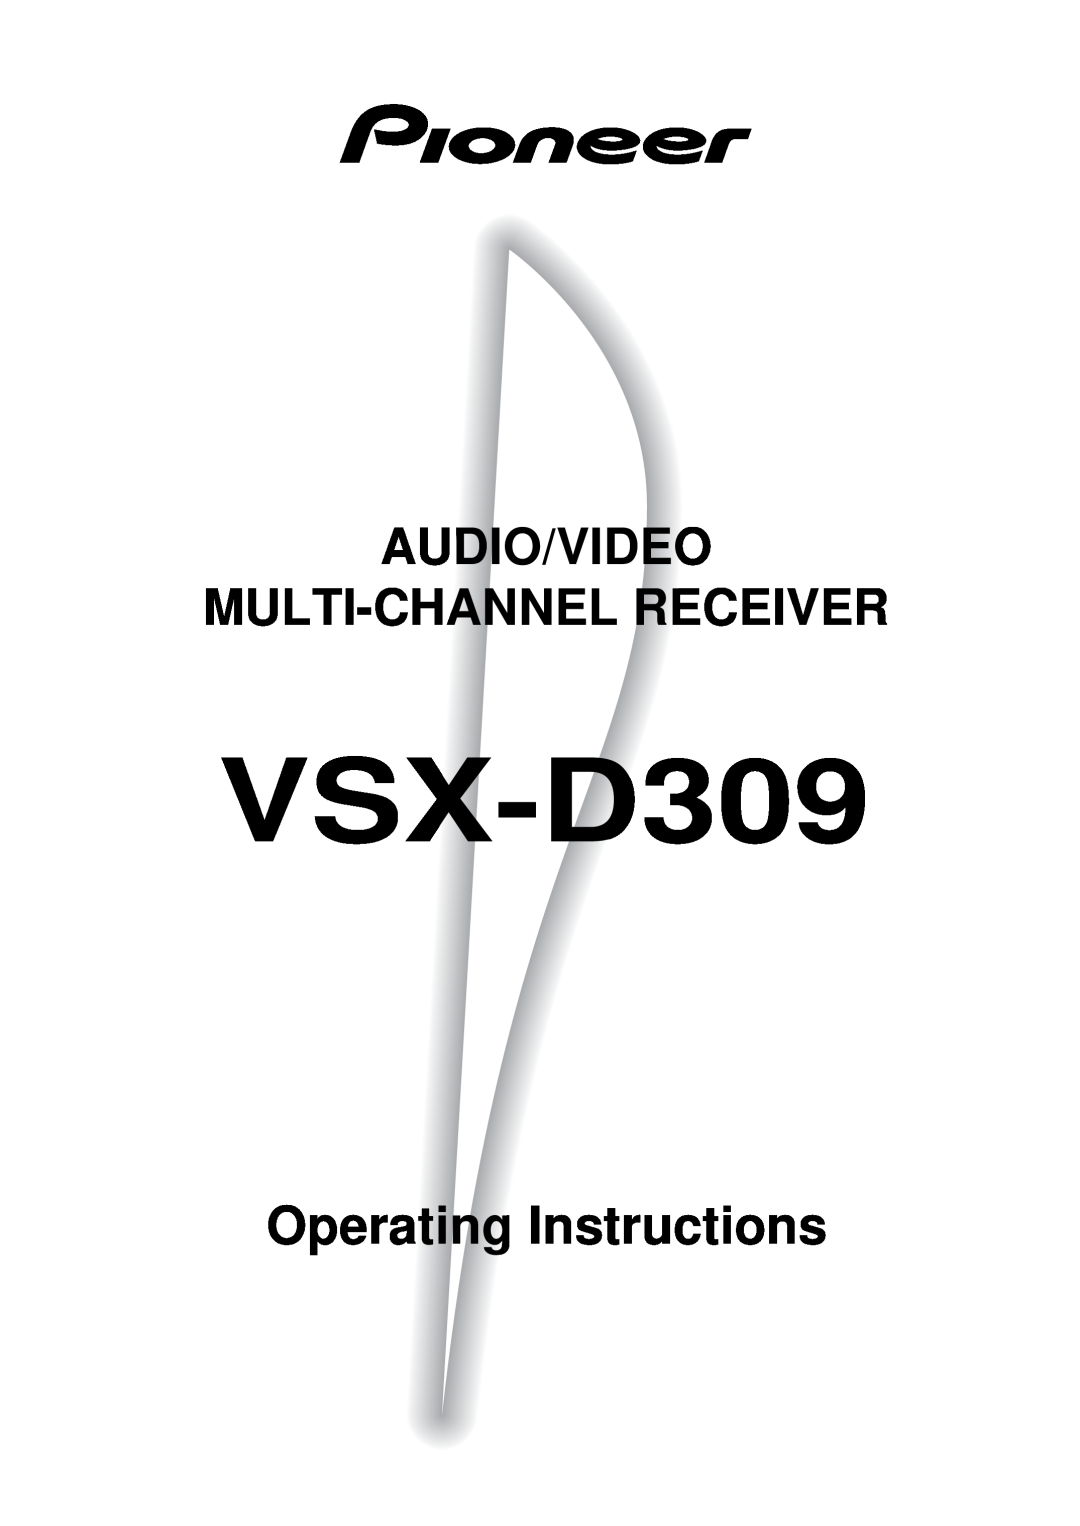 Pioneer VSX-D309 manual Operating Instructions, Audio/Video Multi-Channelreceiver 